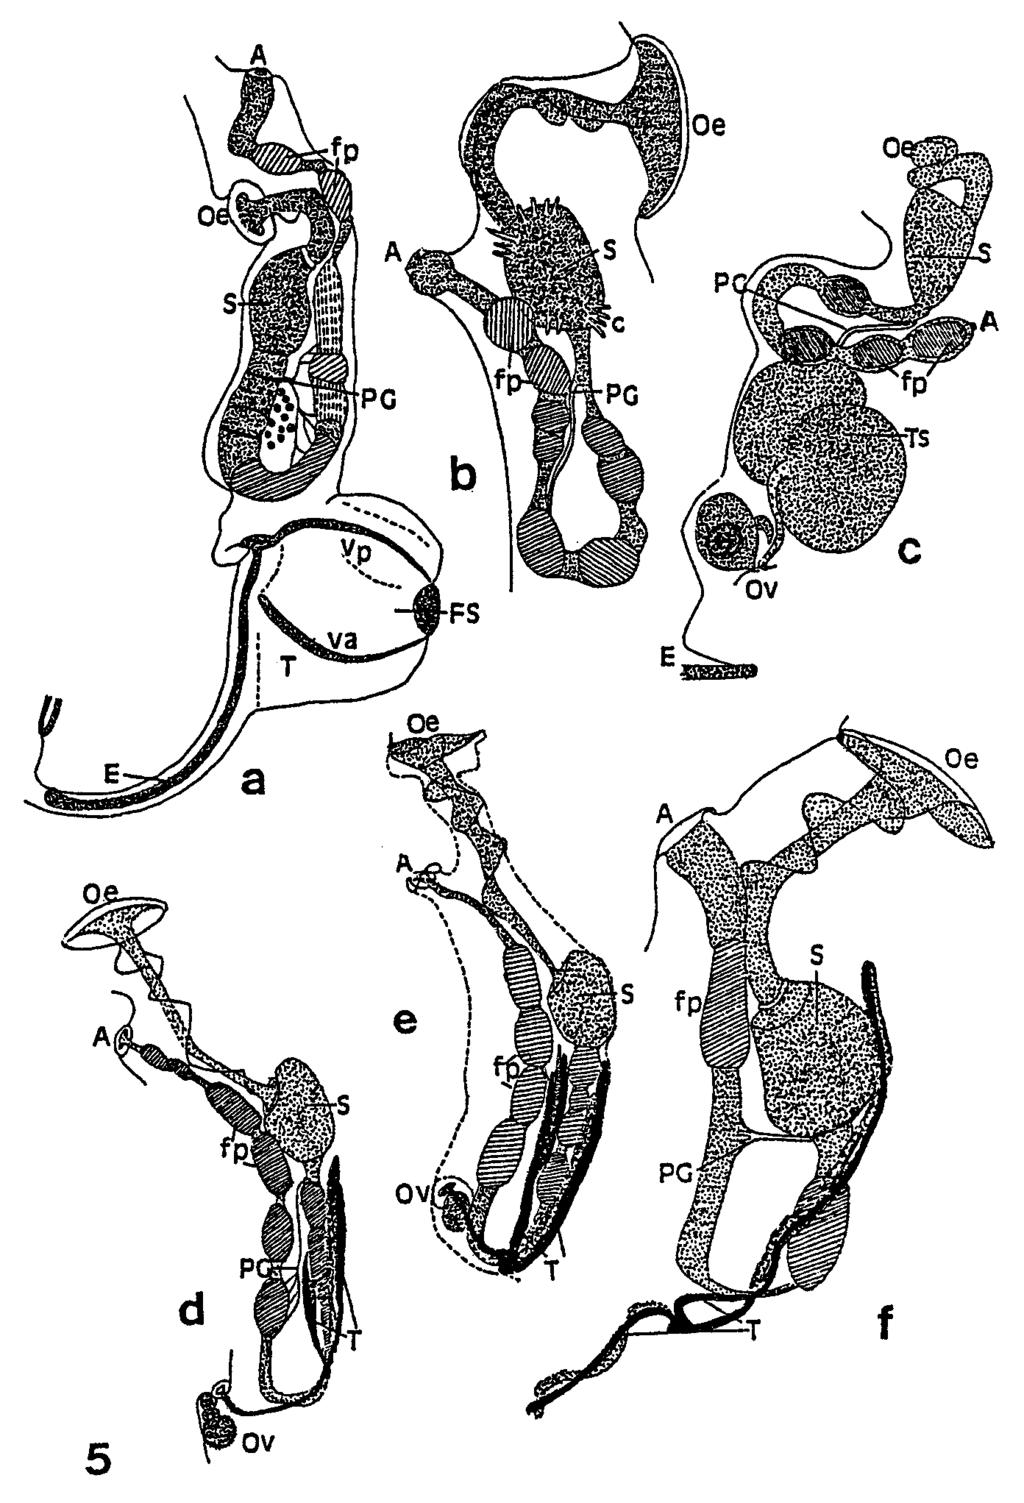 604 BULLETIN OF MARINE SCIENCE, VOL. 72, NO. 3, 2003 Figure 5. Digestive tracts and gonads of the different species.